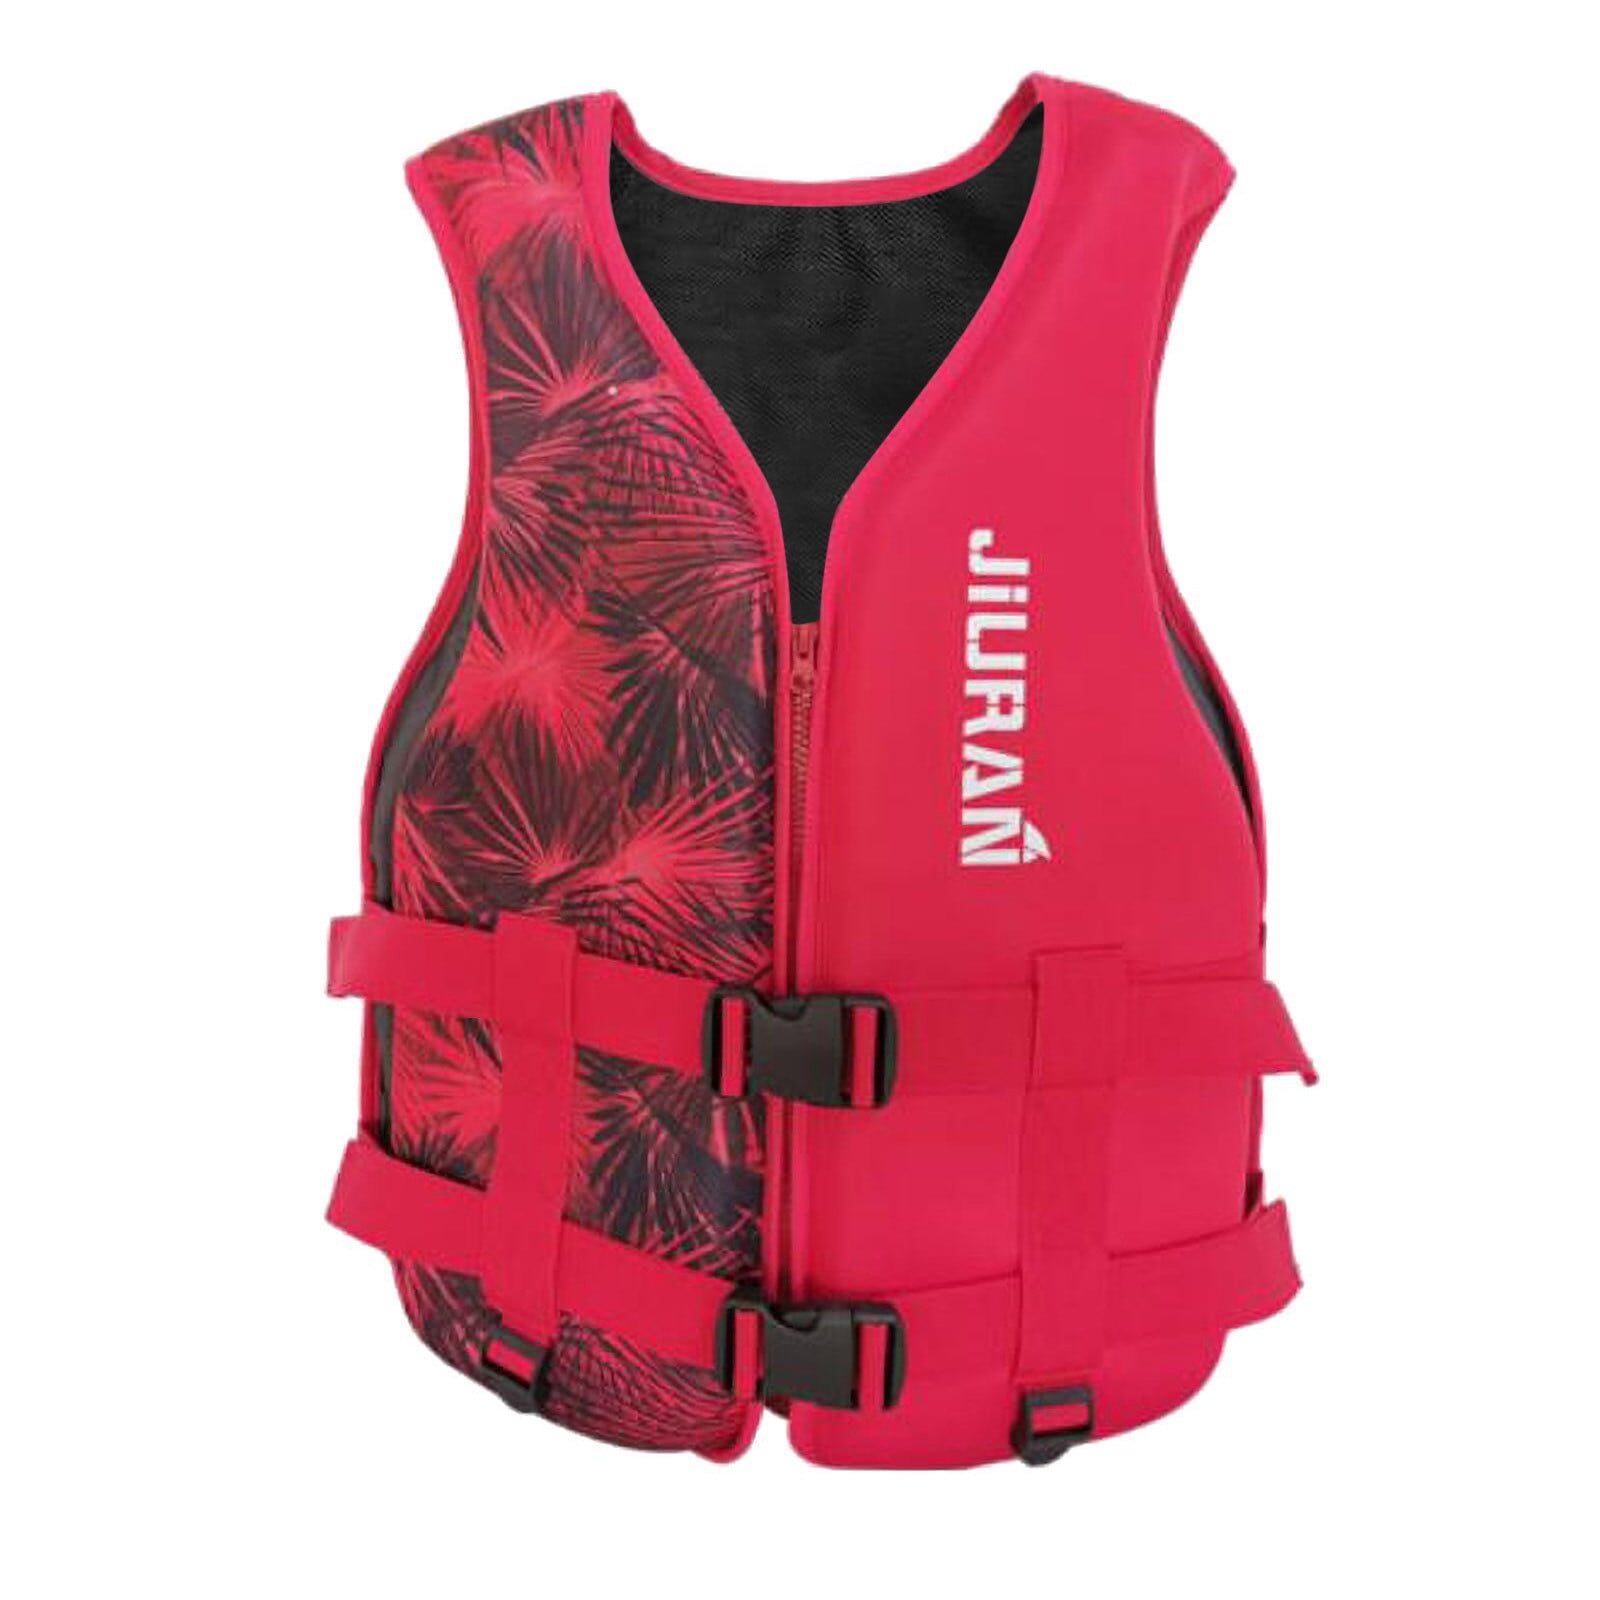 Preowned Water Sports Youth Life Jacket 